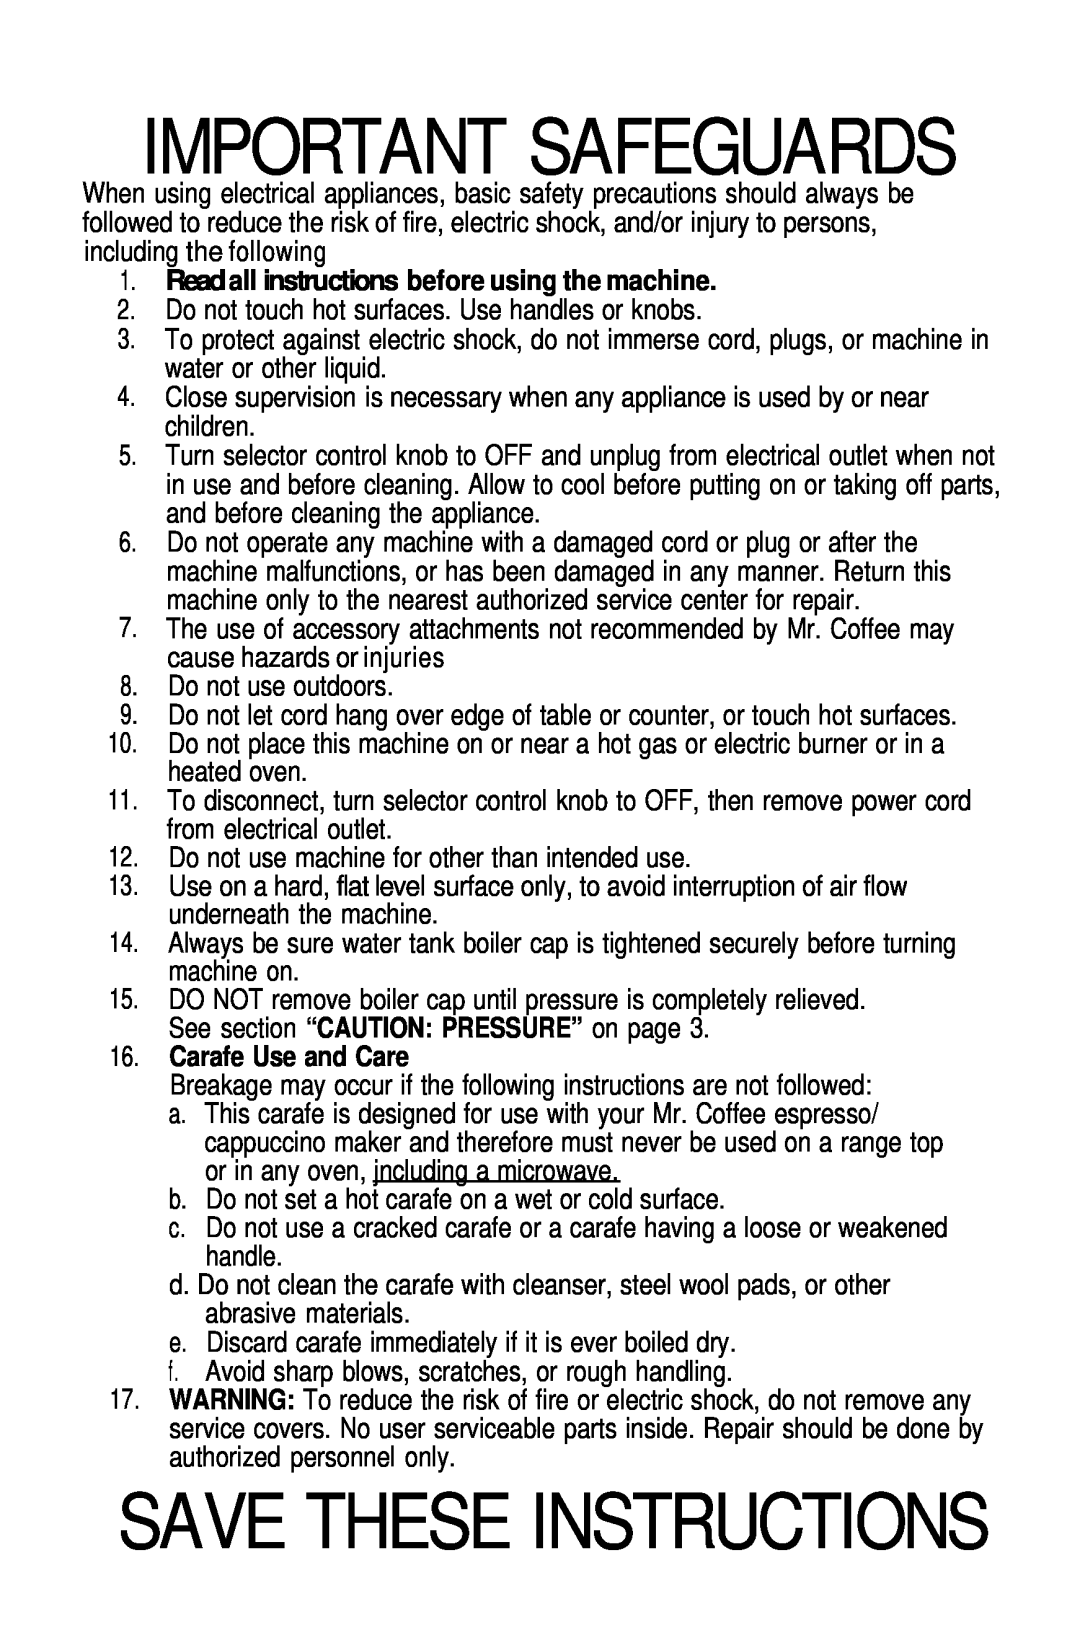 Mr. Coffee ECM9 manual Readall instructions before using the machine, Carafe Use and Care, Important Safeguards 